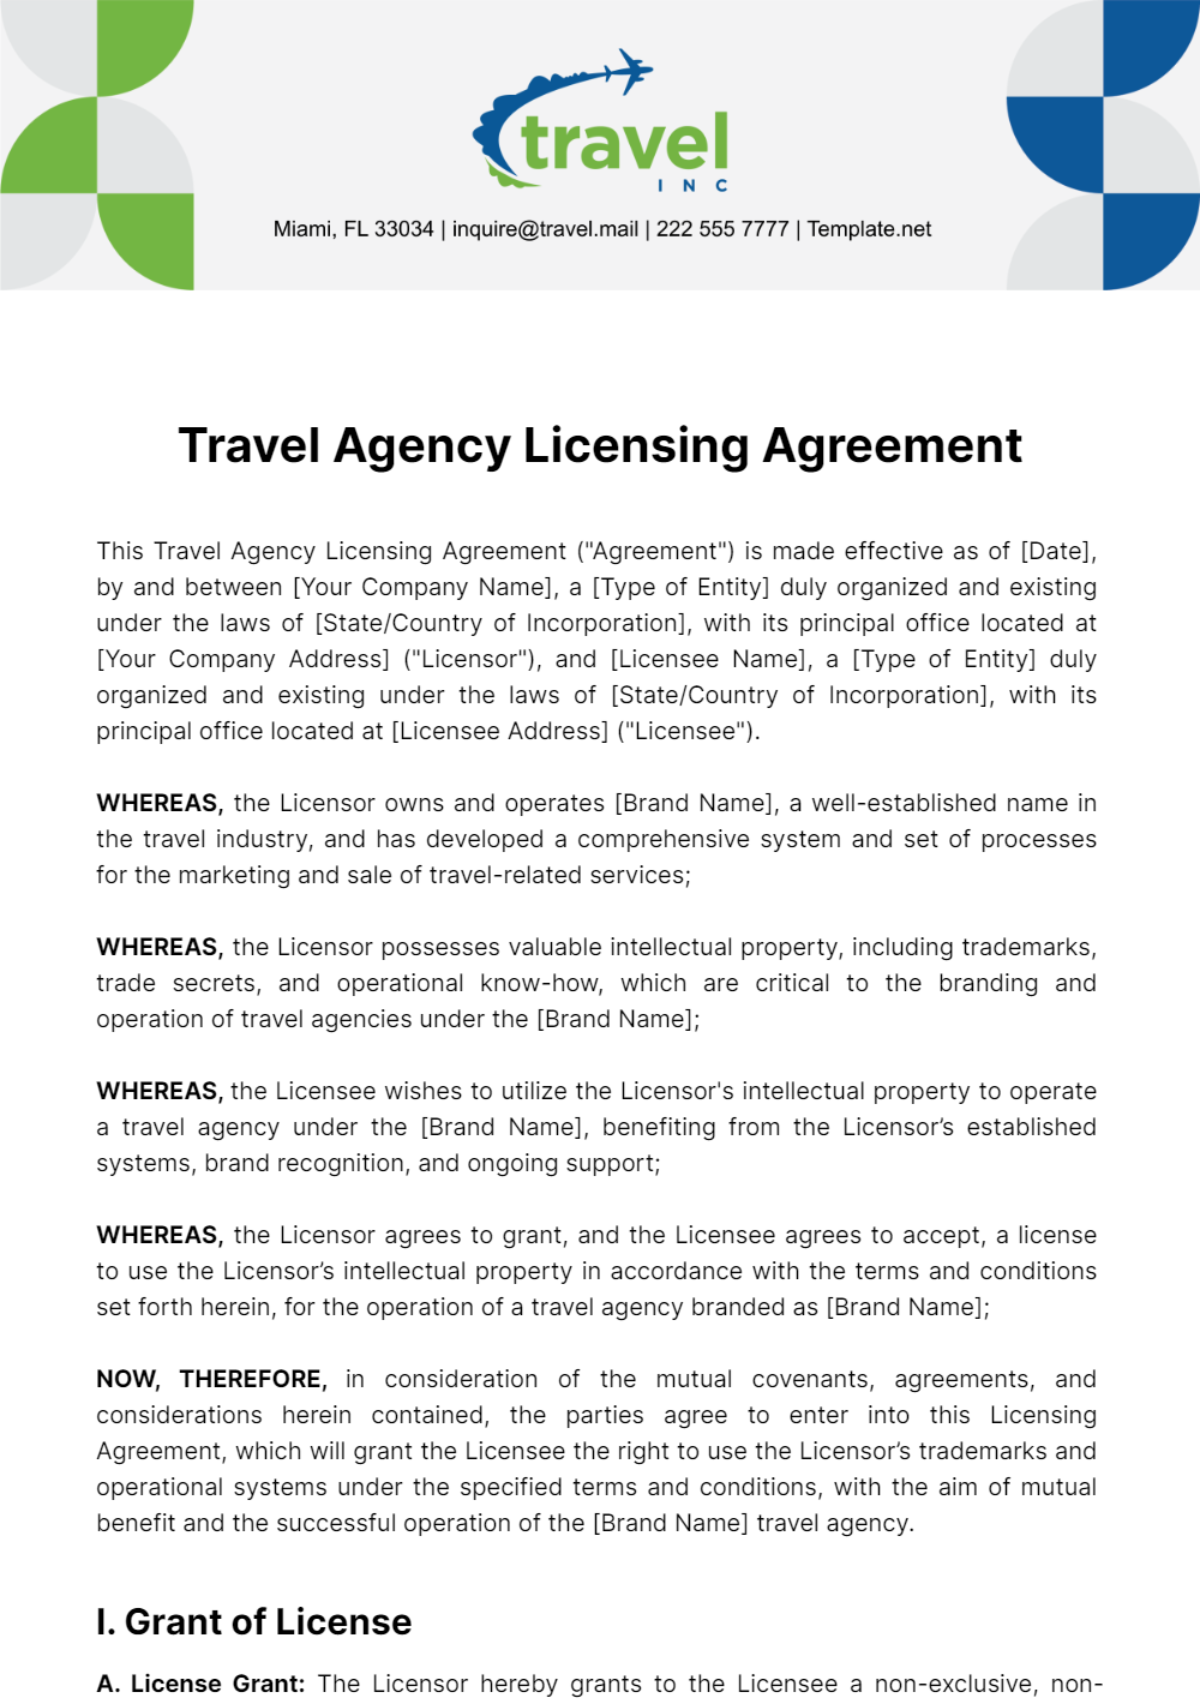 Free Travel Agency Licensing Agreement Template